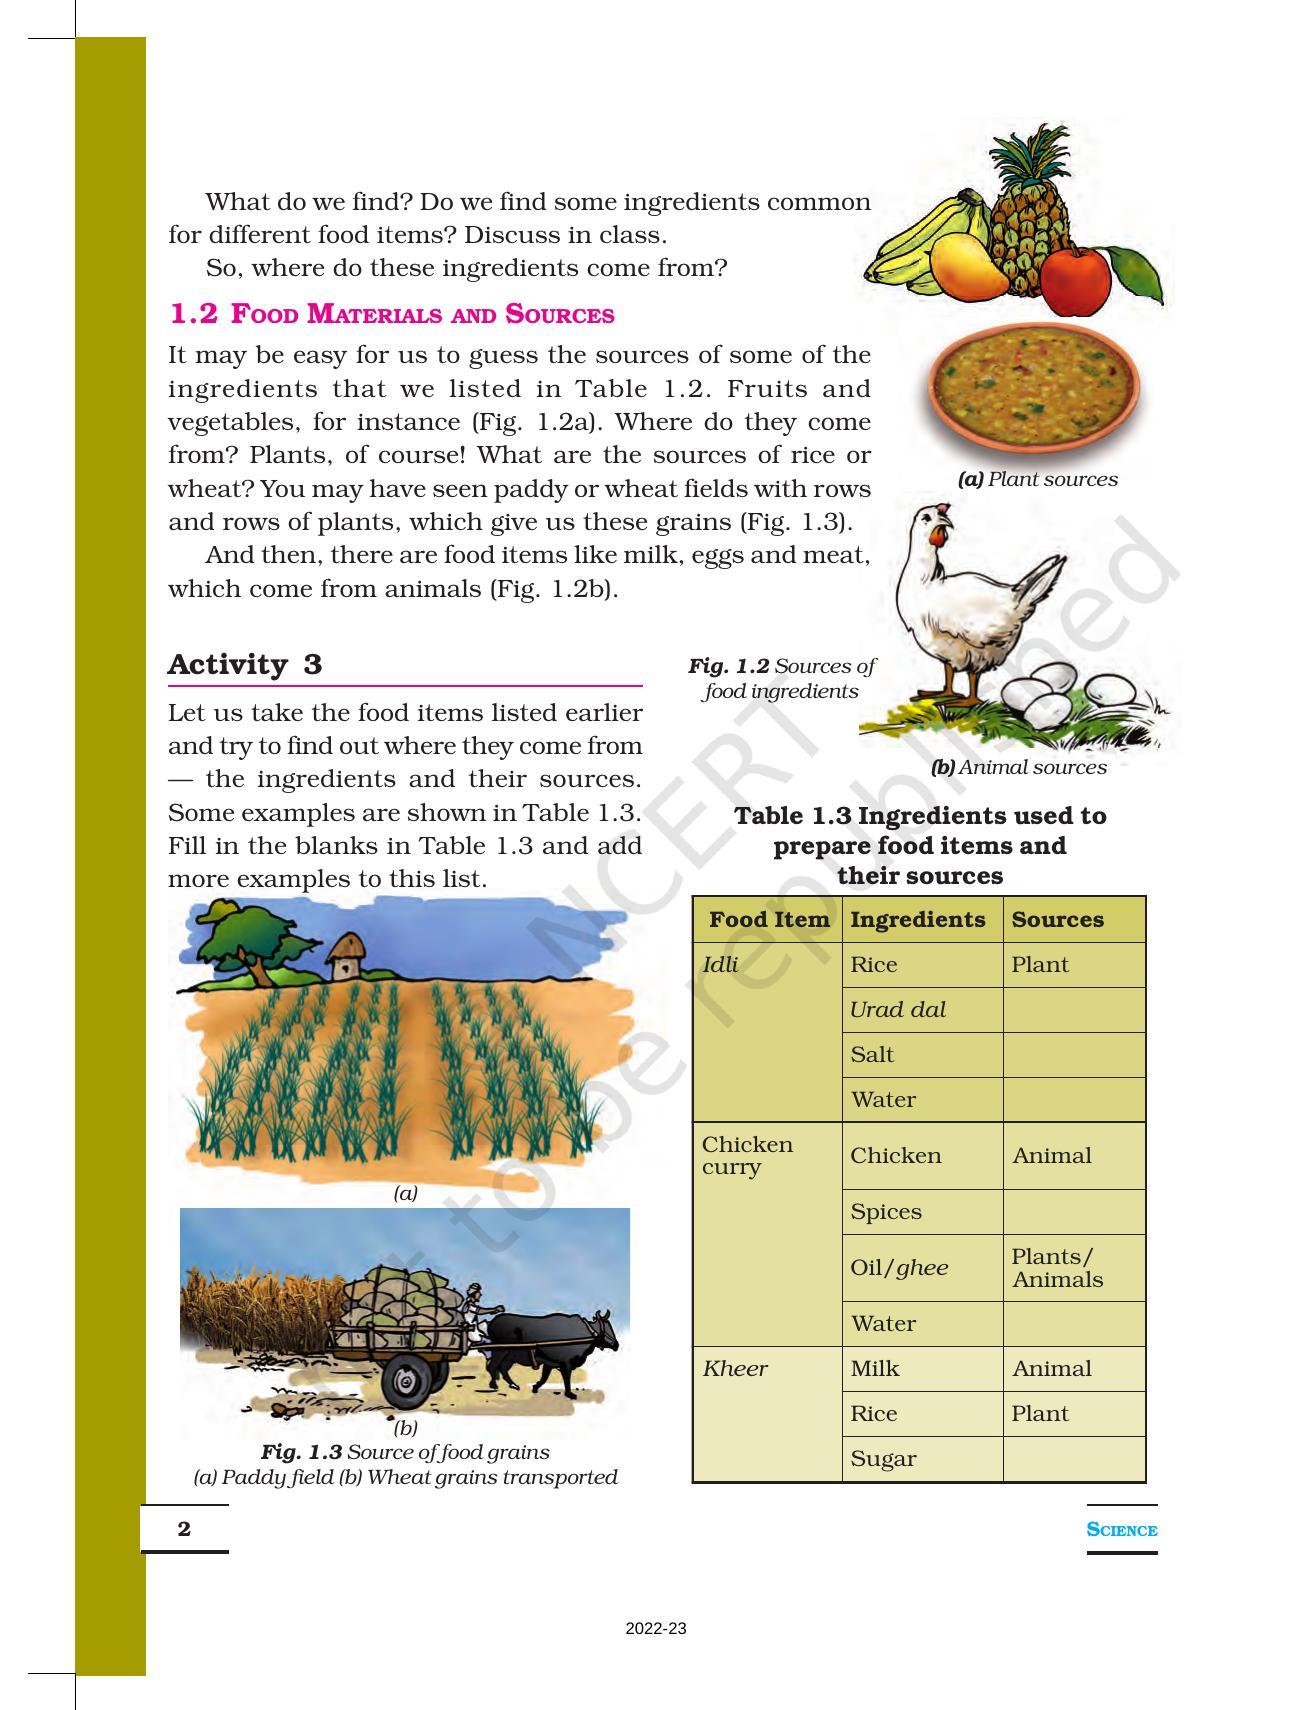 NCERT Book for Class 6 Science: Chapter 1-Food, Where Does It Come From? - Page 2